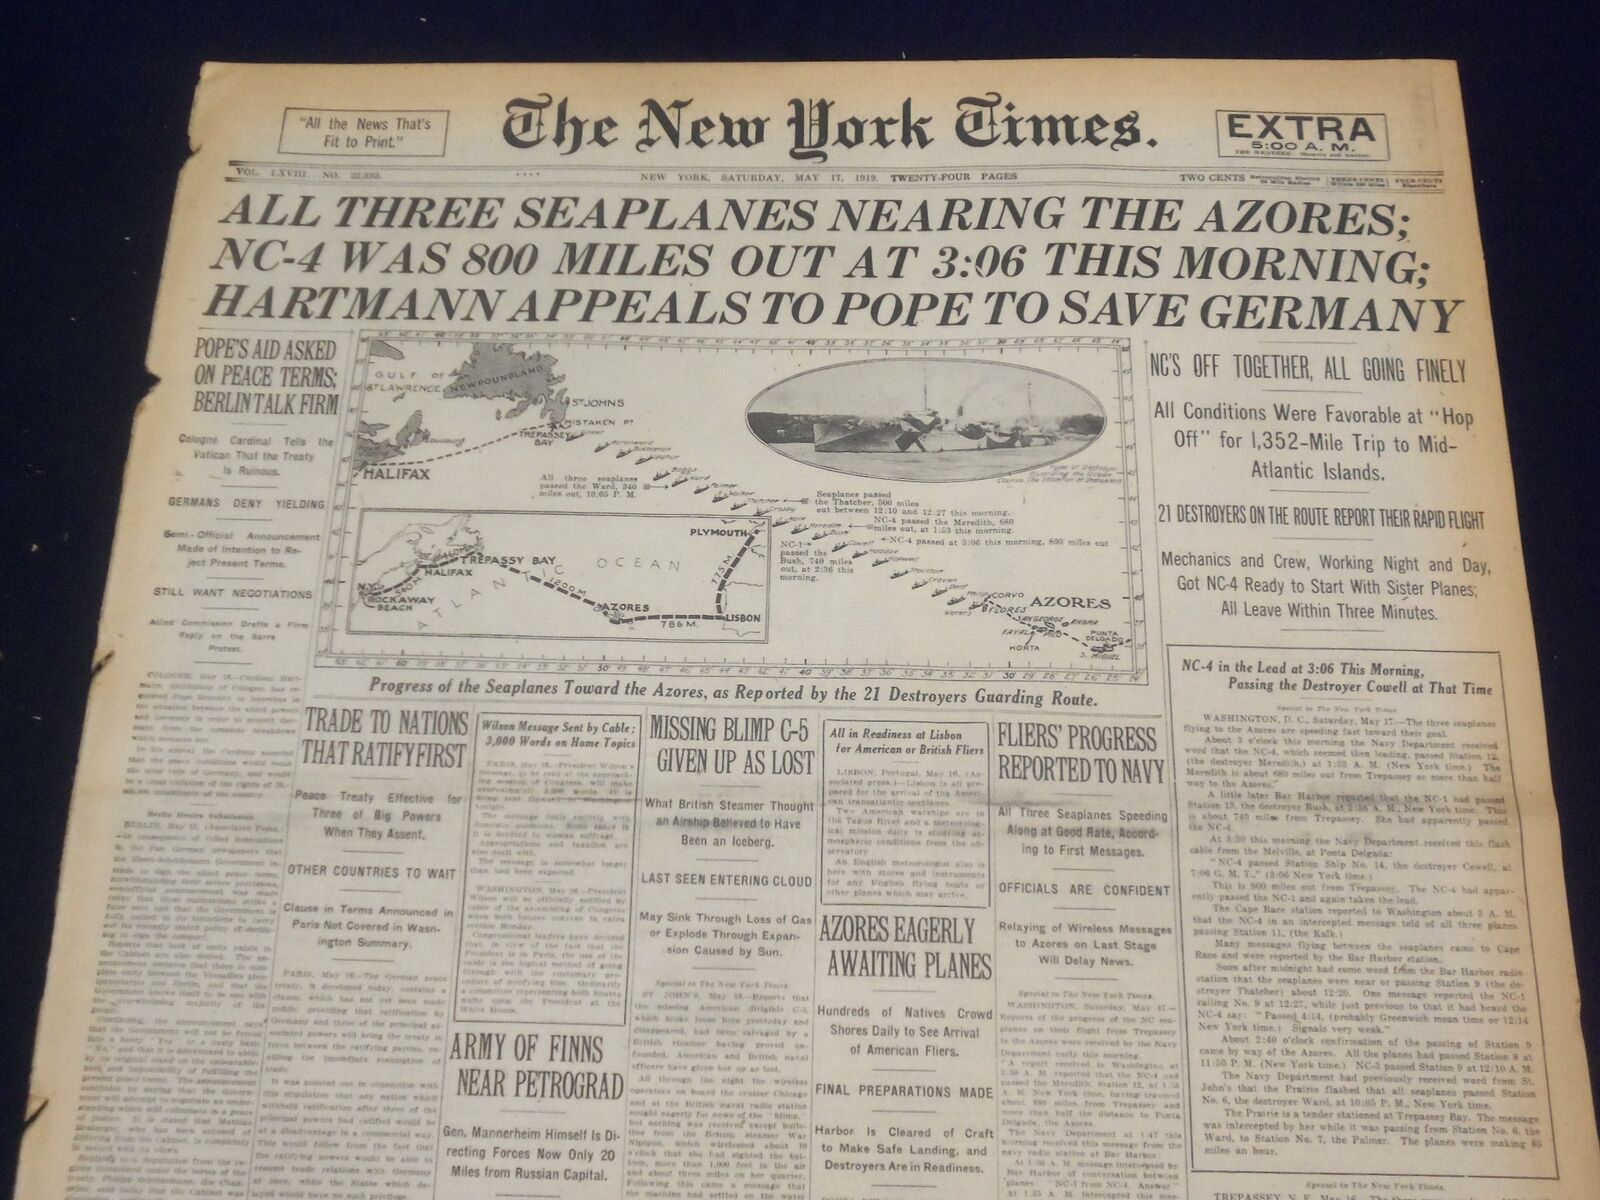 1919 MAY 17 NEW YORK TIMES - ALL 3 SEAPLANES NEARING THE AZORES - NT 9250